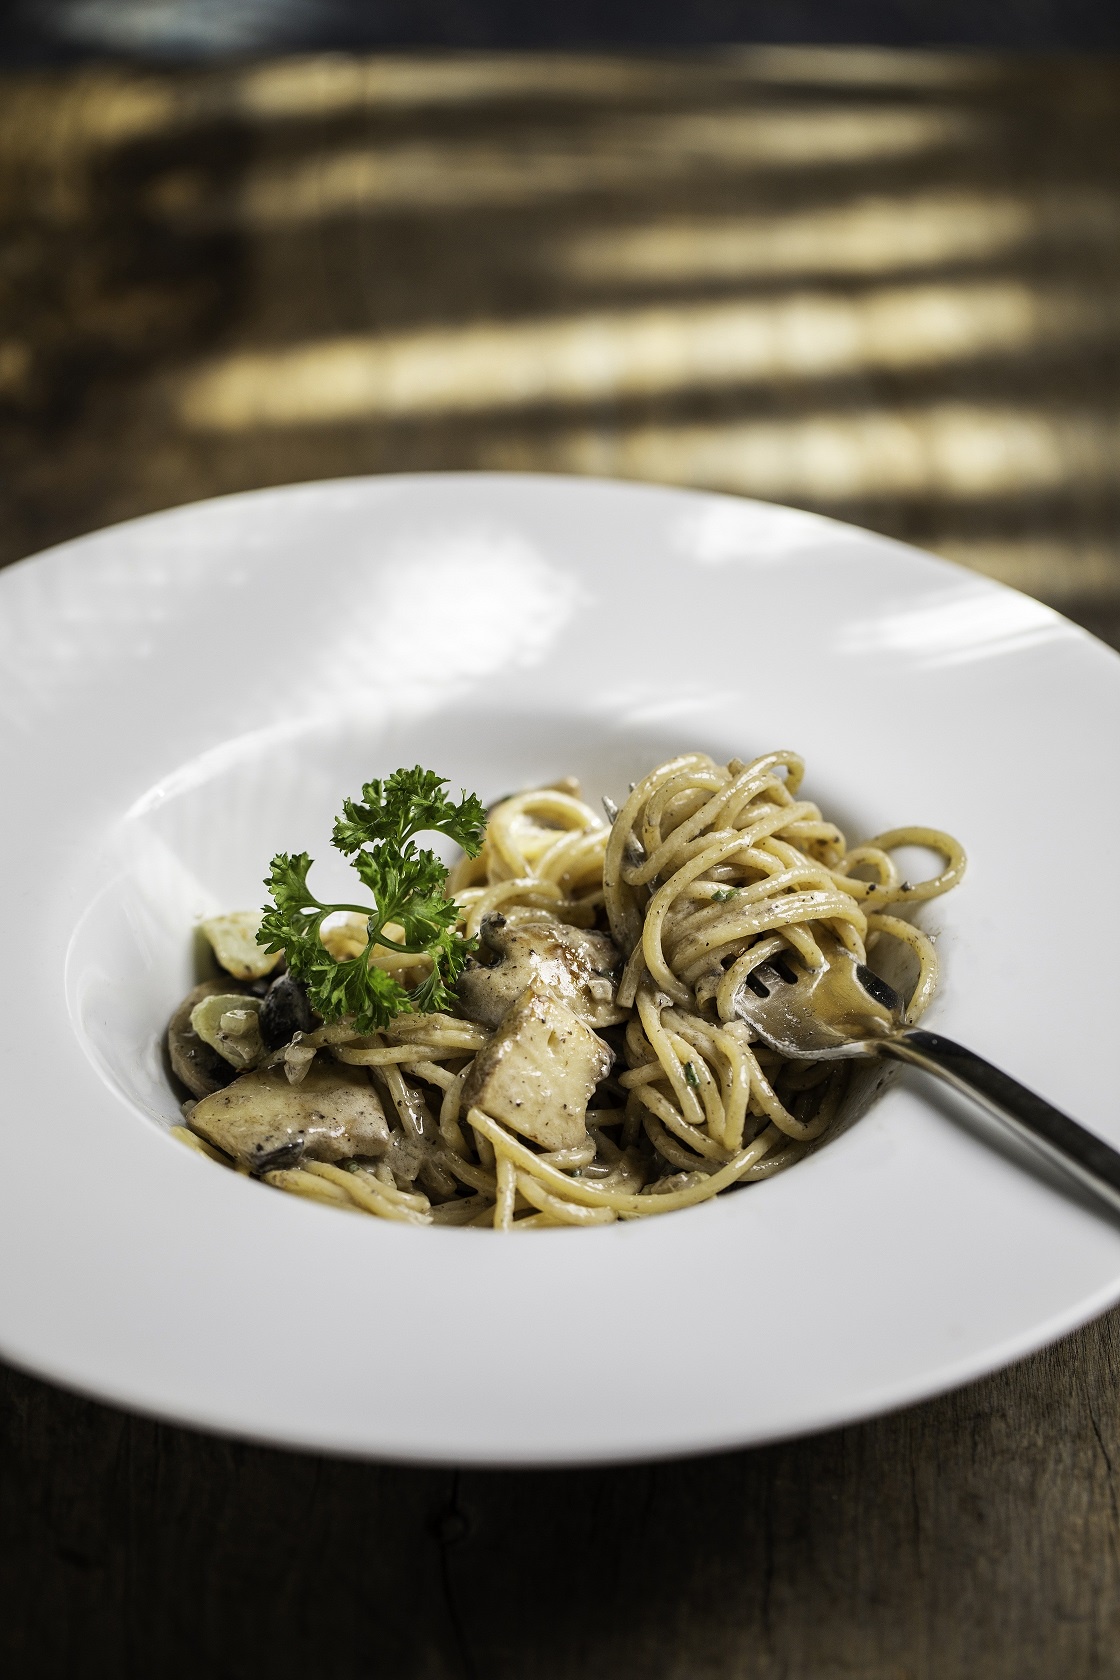 Special Dish for Truffle Lovers is Back Cafe Kantary is Ready to Serve Spaghetti Mushrooms and Truffle Cream Sauce